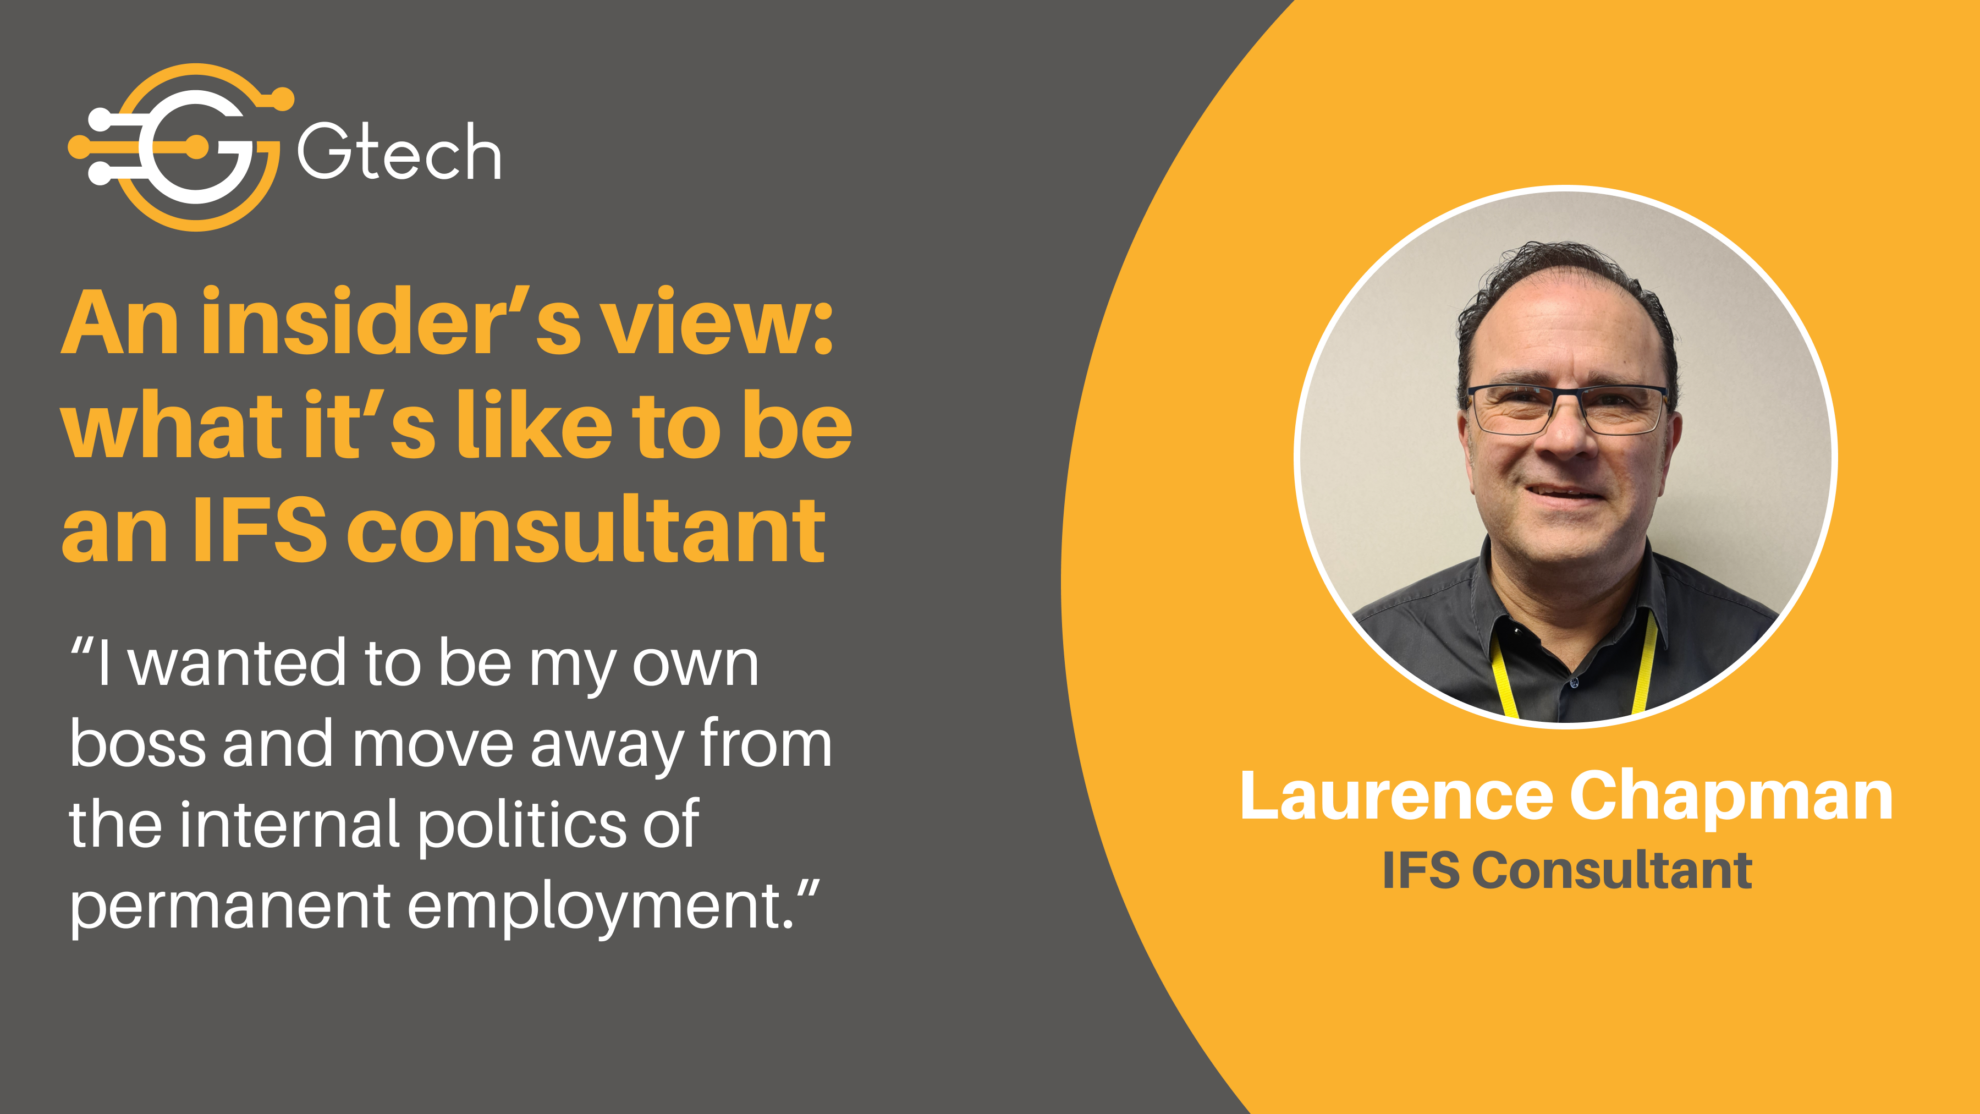 An insider’s view: what it’s like to be an IFS consultant